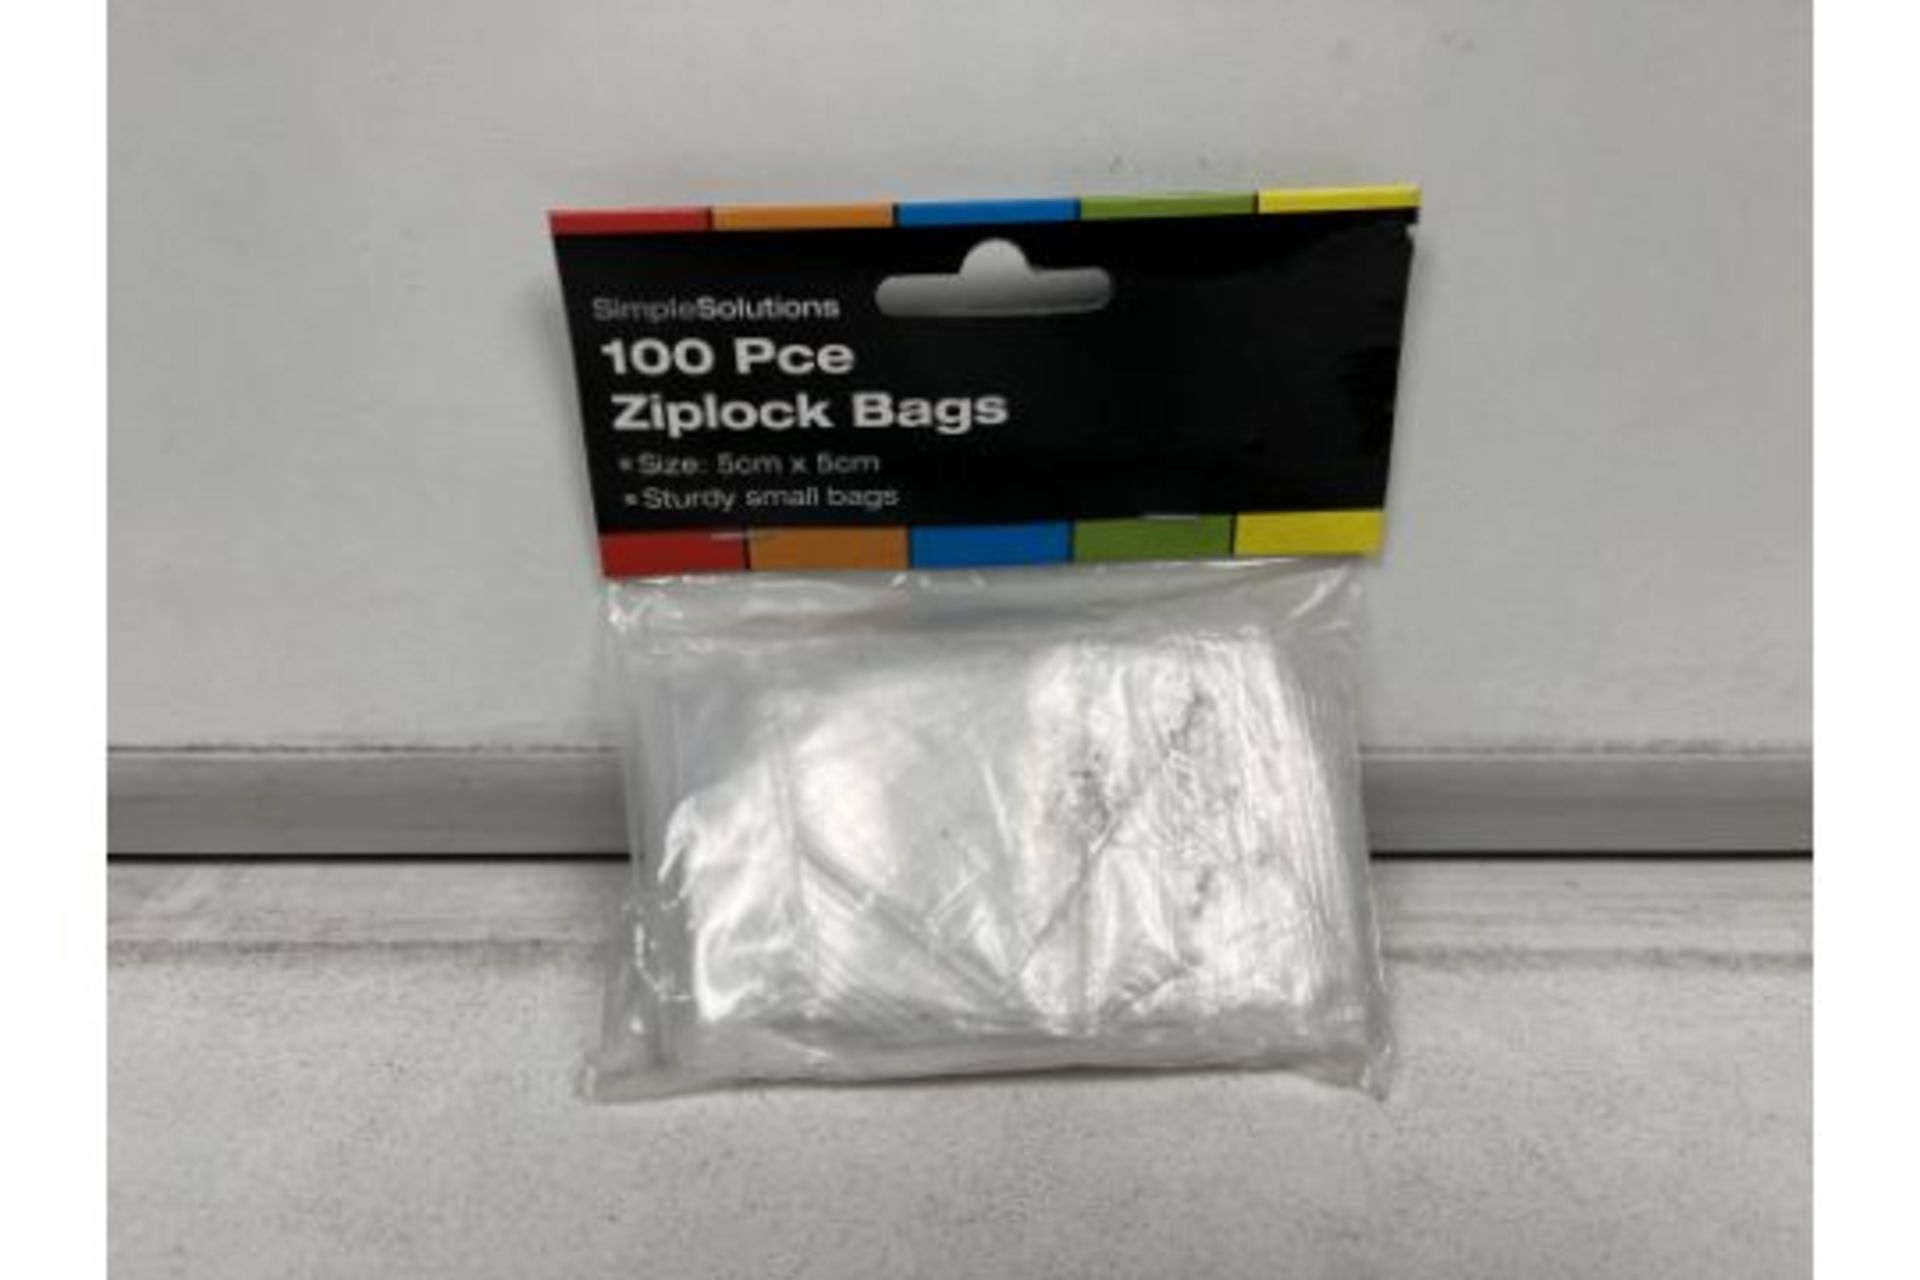 96 X NEW PACKAGED SIMPLE SOLUTIONS PACKS OF 100 ZIPLOCK BAGS. SIZE 5X5CM. STURDY DESIGN.